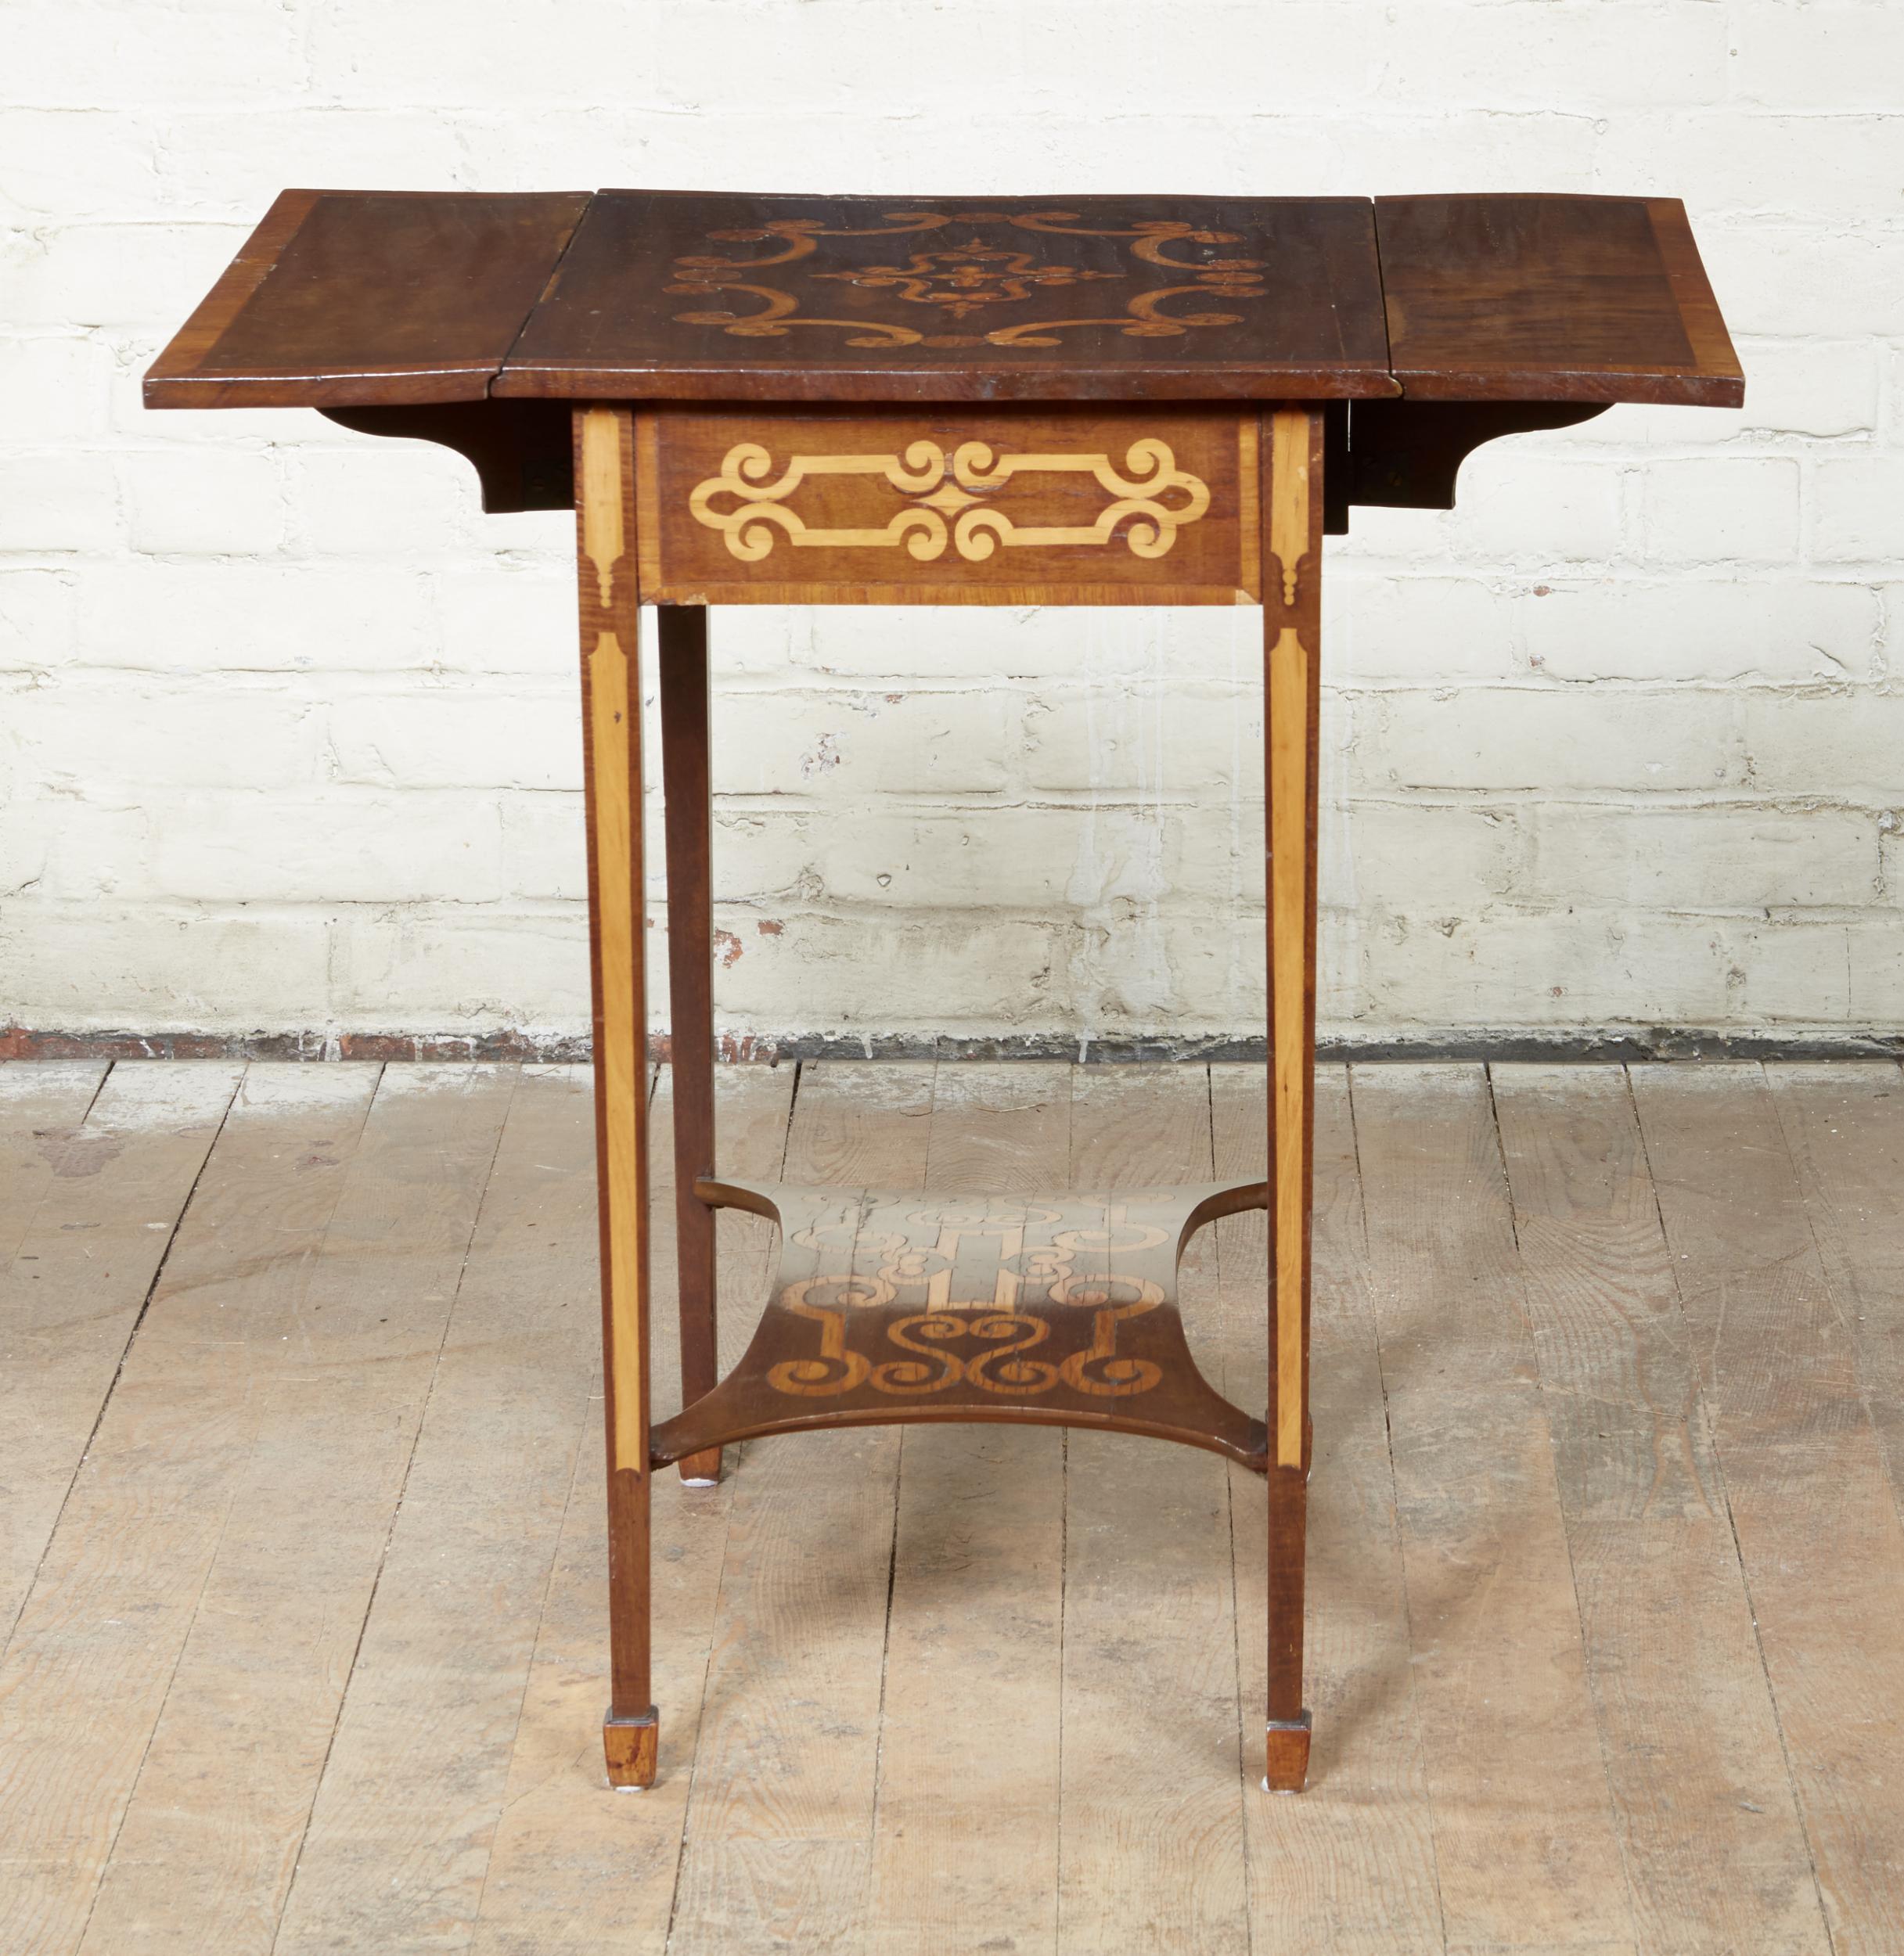 Inlay Diminutive Inlaid Harewood Pembroke Table For Sale